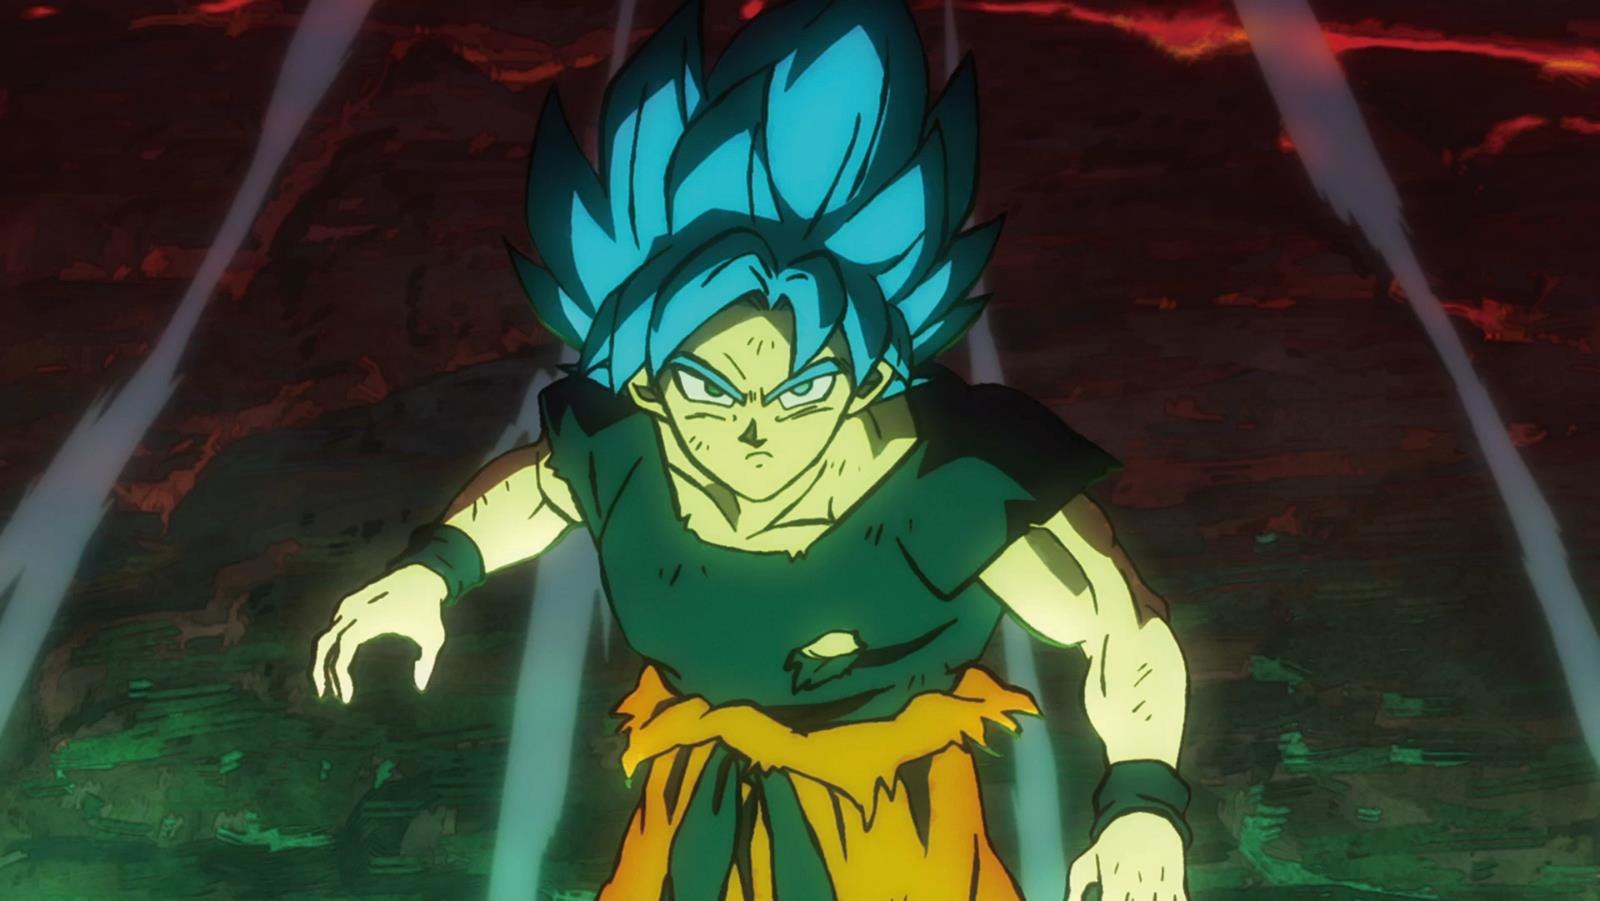 Dragon Ball Super Broly Goes Super Saiyan With 1 U S Box Office Opening For Funimation Animation World Network